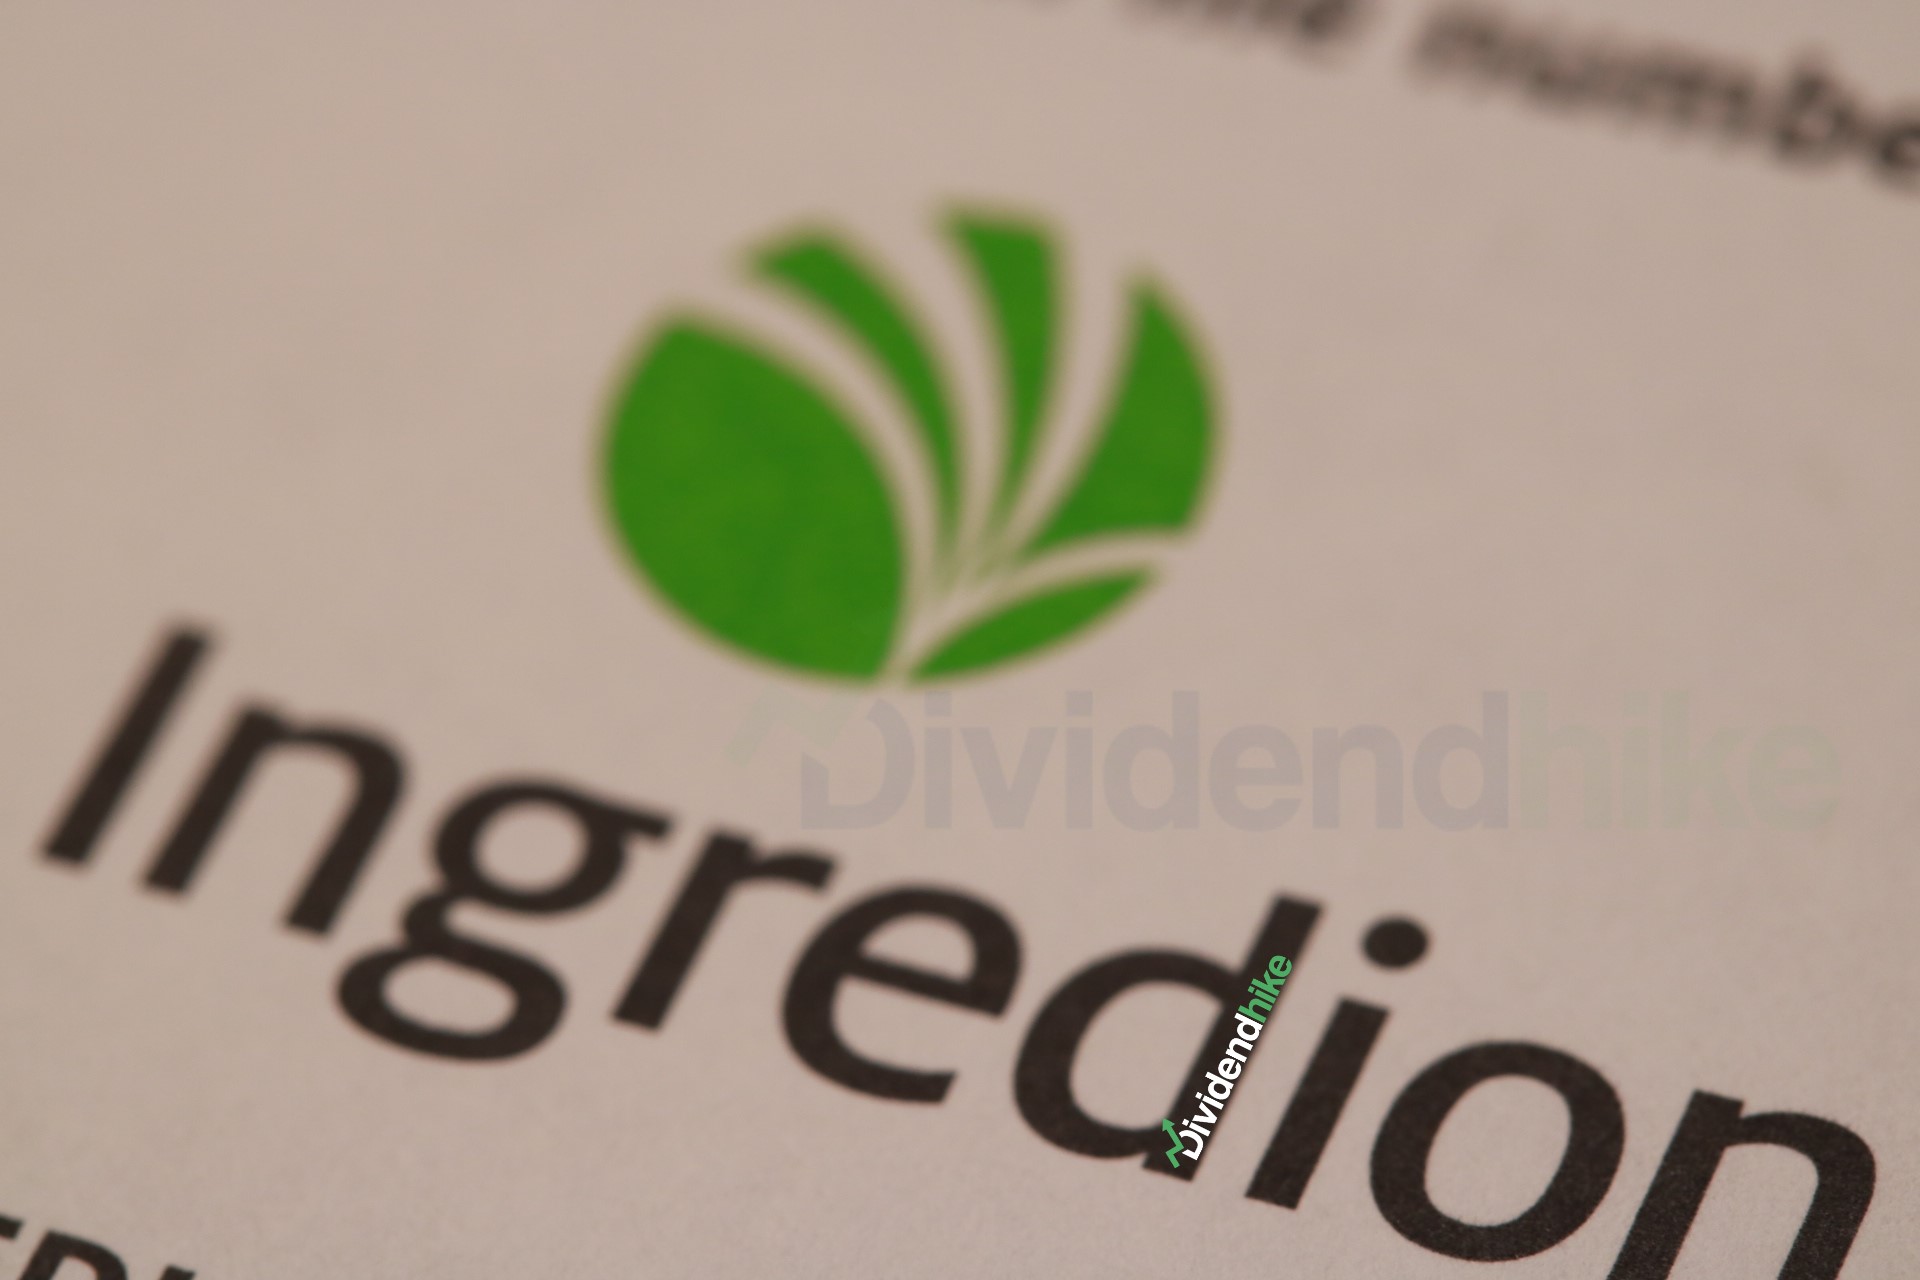 Ingredion hikes dividend by 4.2%